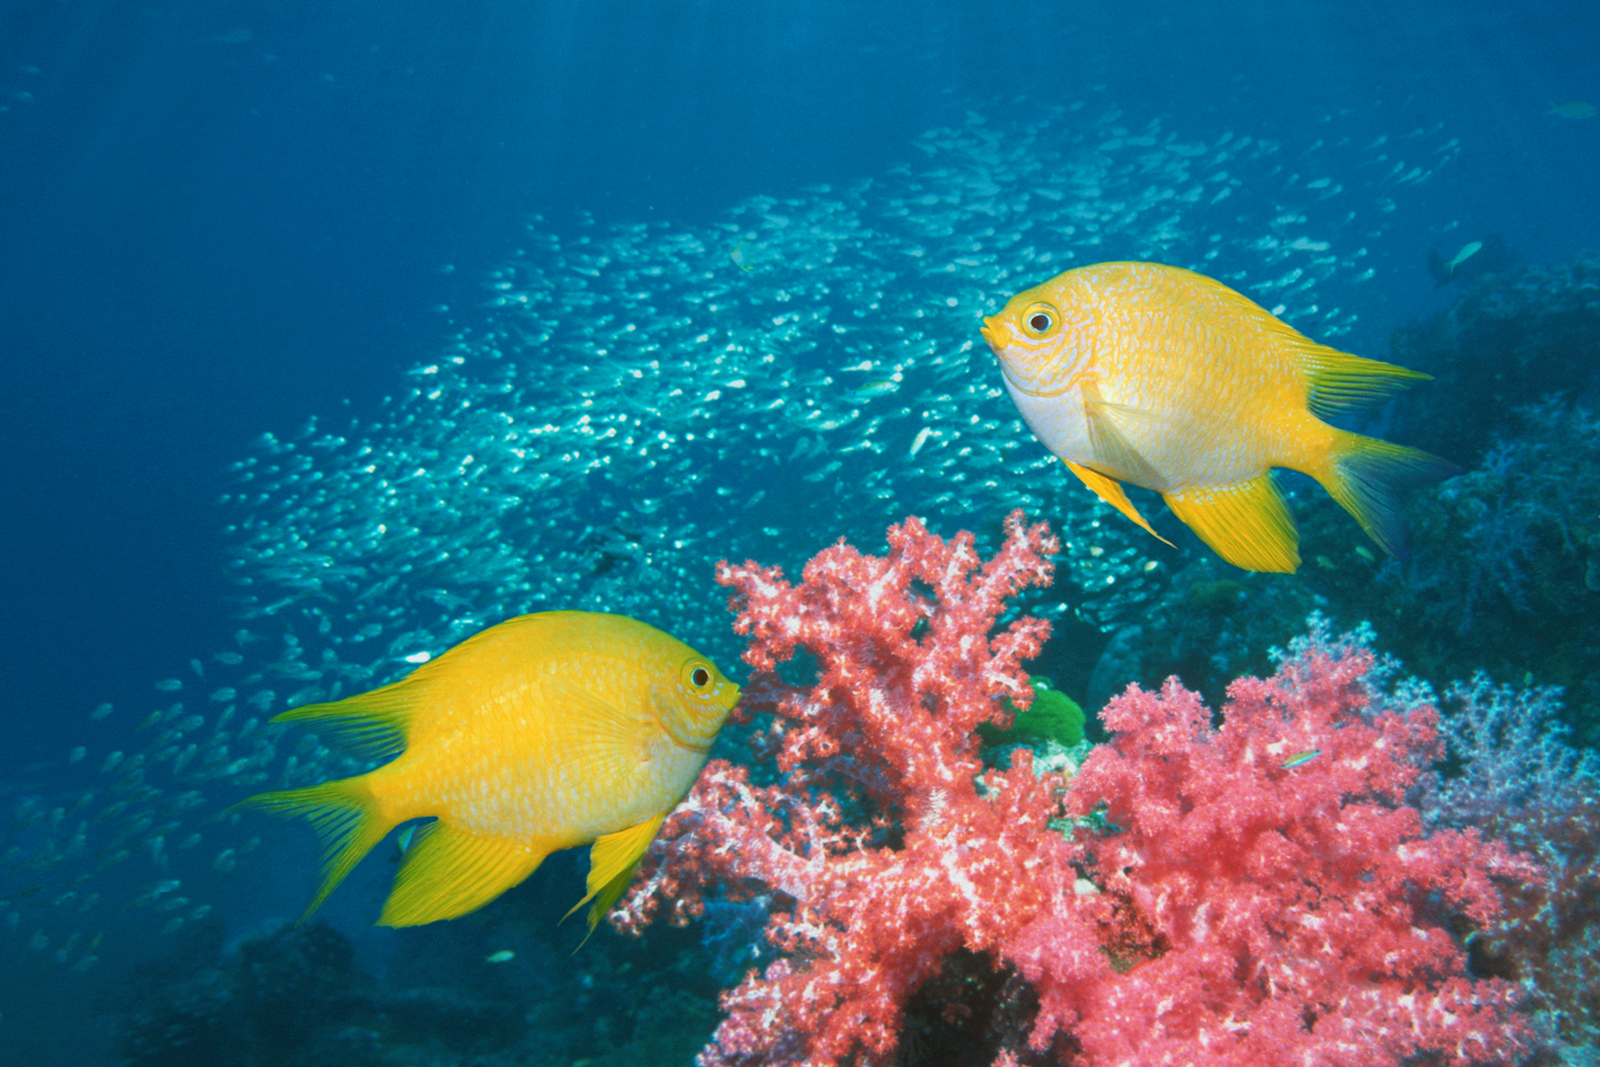 <p>  The yellow damselfish is a burst of sunshine in any tank, not just for its bright hue, but also its spirited nature. They're resilient to various water conditions, making them a top pick for those new to marine pet-keeping. </p> <p>  Their active behavior and easy care make them a lively and colorful addition to any aquarium. Unlike some damselfish, it rarely bothers corals or invertebrates in the tank and adapts easily to a new saltwater aquarium. </p> <blockquote><h3>Quick Tip</h3><p>    Add cleaner shrimp as a neat tank mate to not only help keep the tank clean but also the fish.   </p></blockquote>